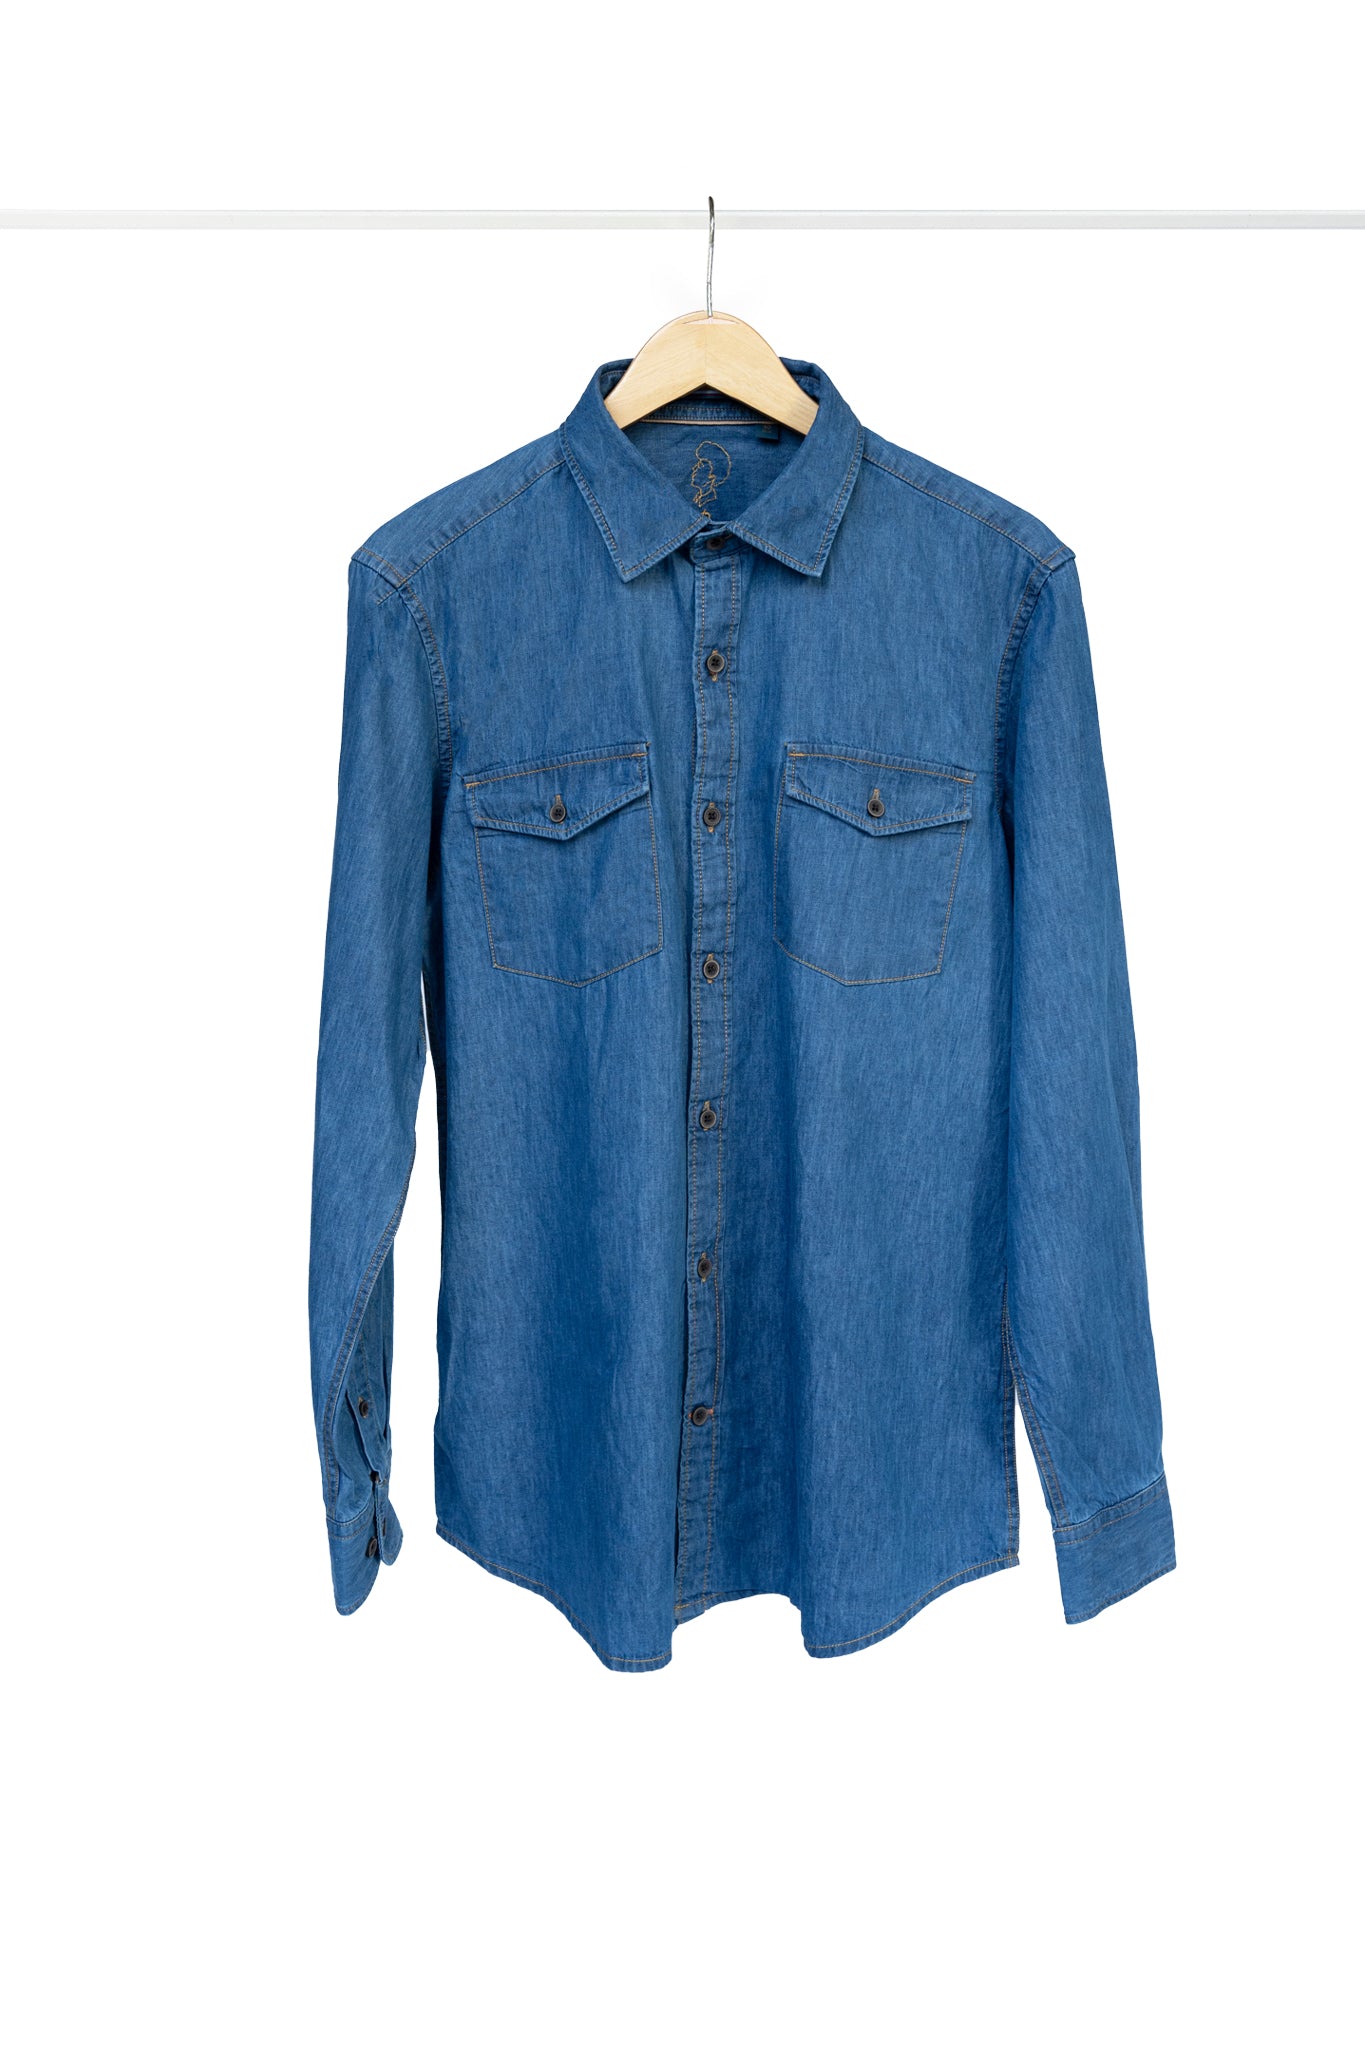 Bare Brown Denim Shirt, Slim Fit with Full Sleeves - Blue